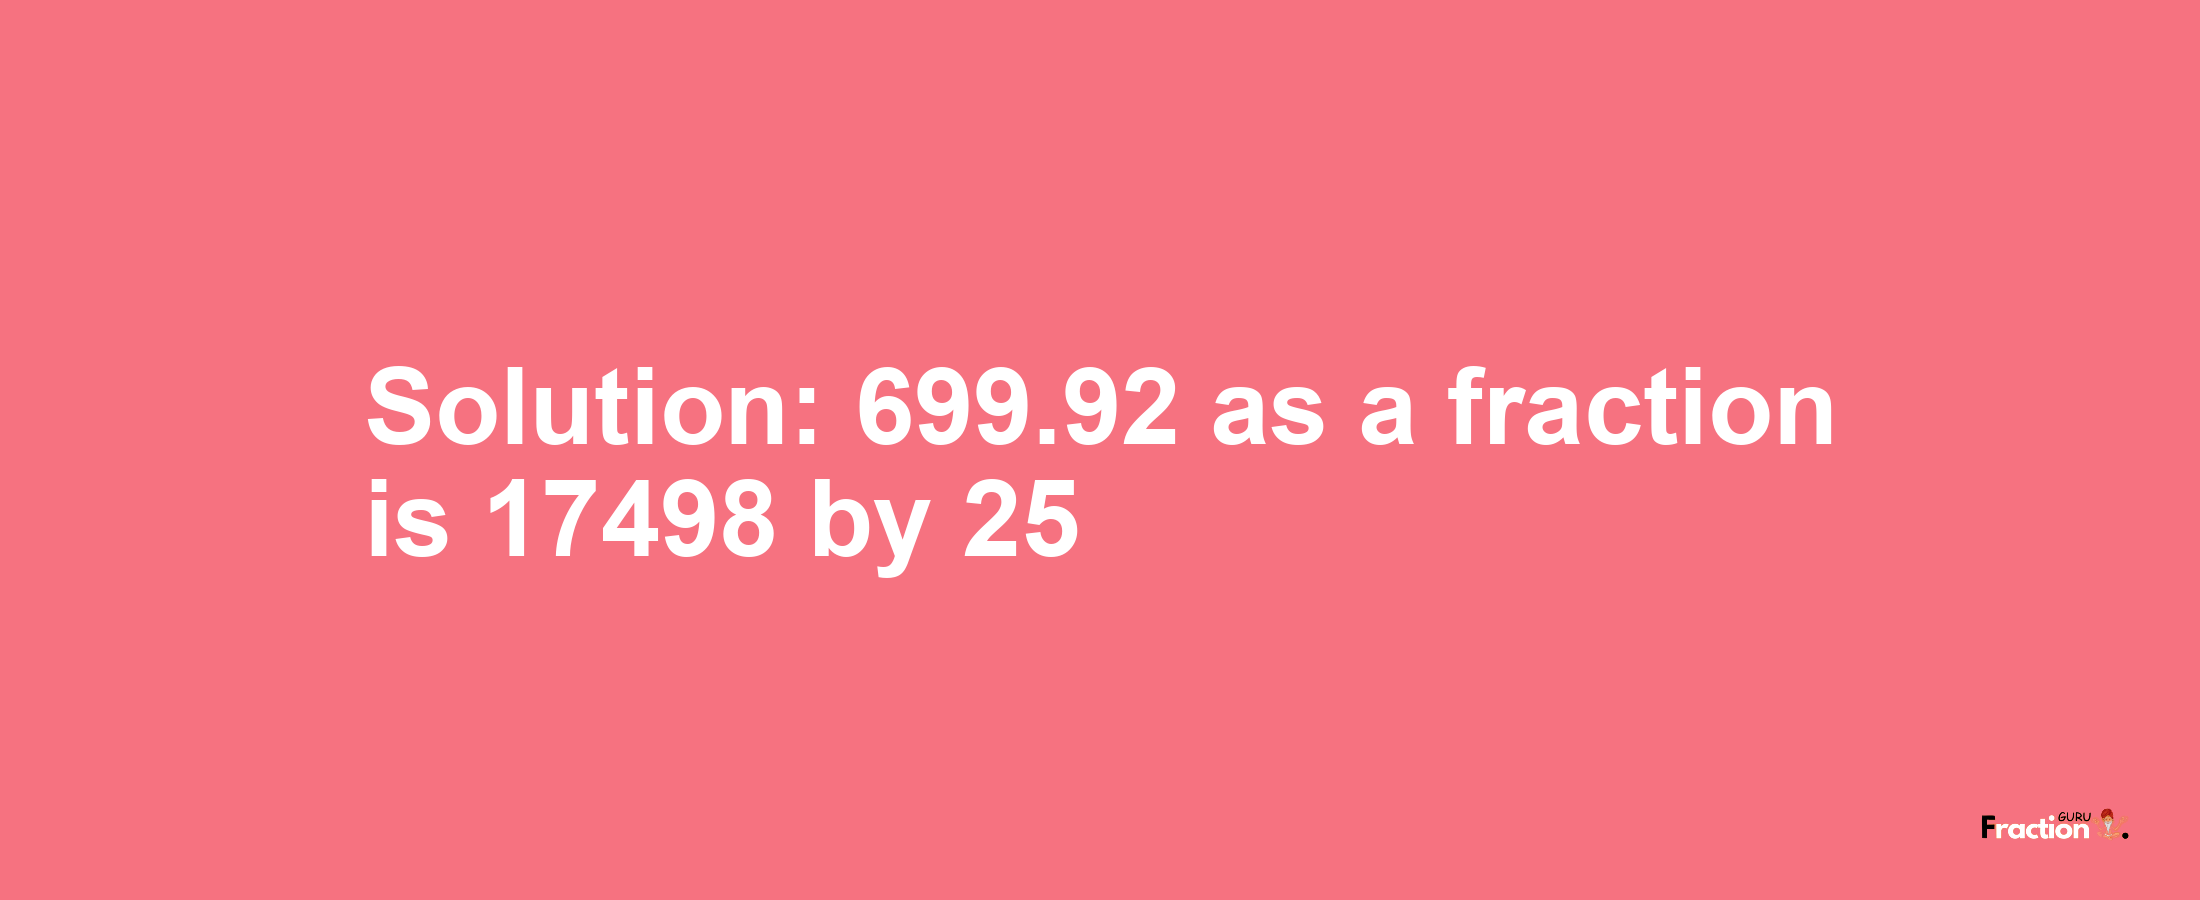 Solution:699.92 as a fraction is 17498/25